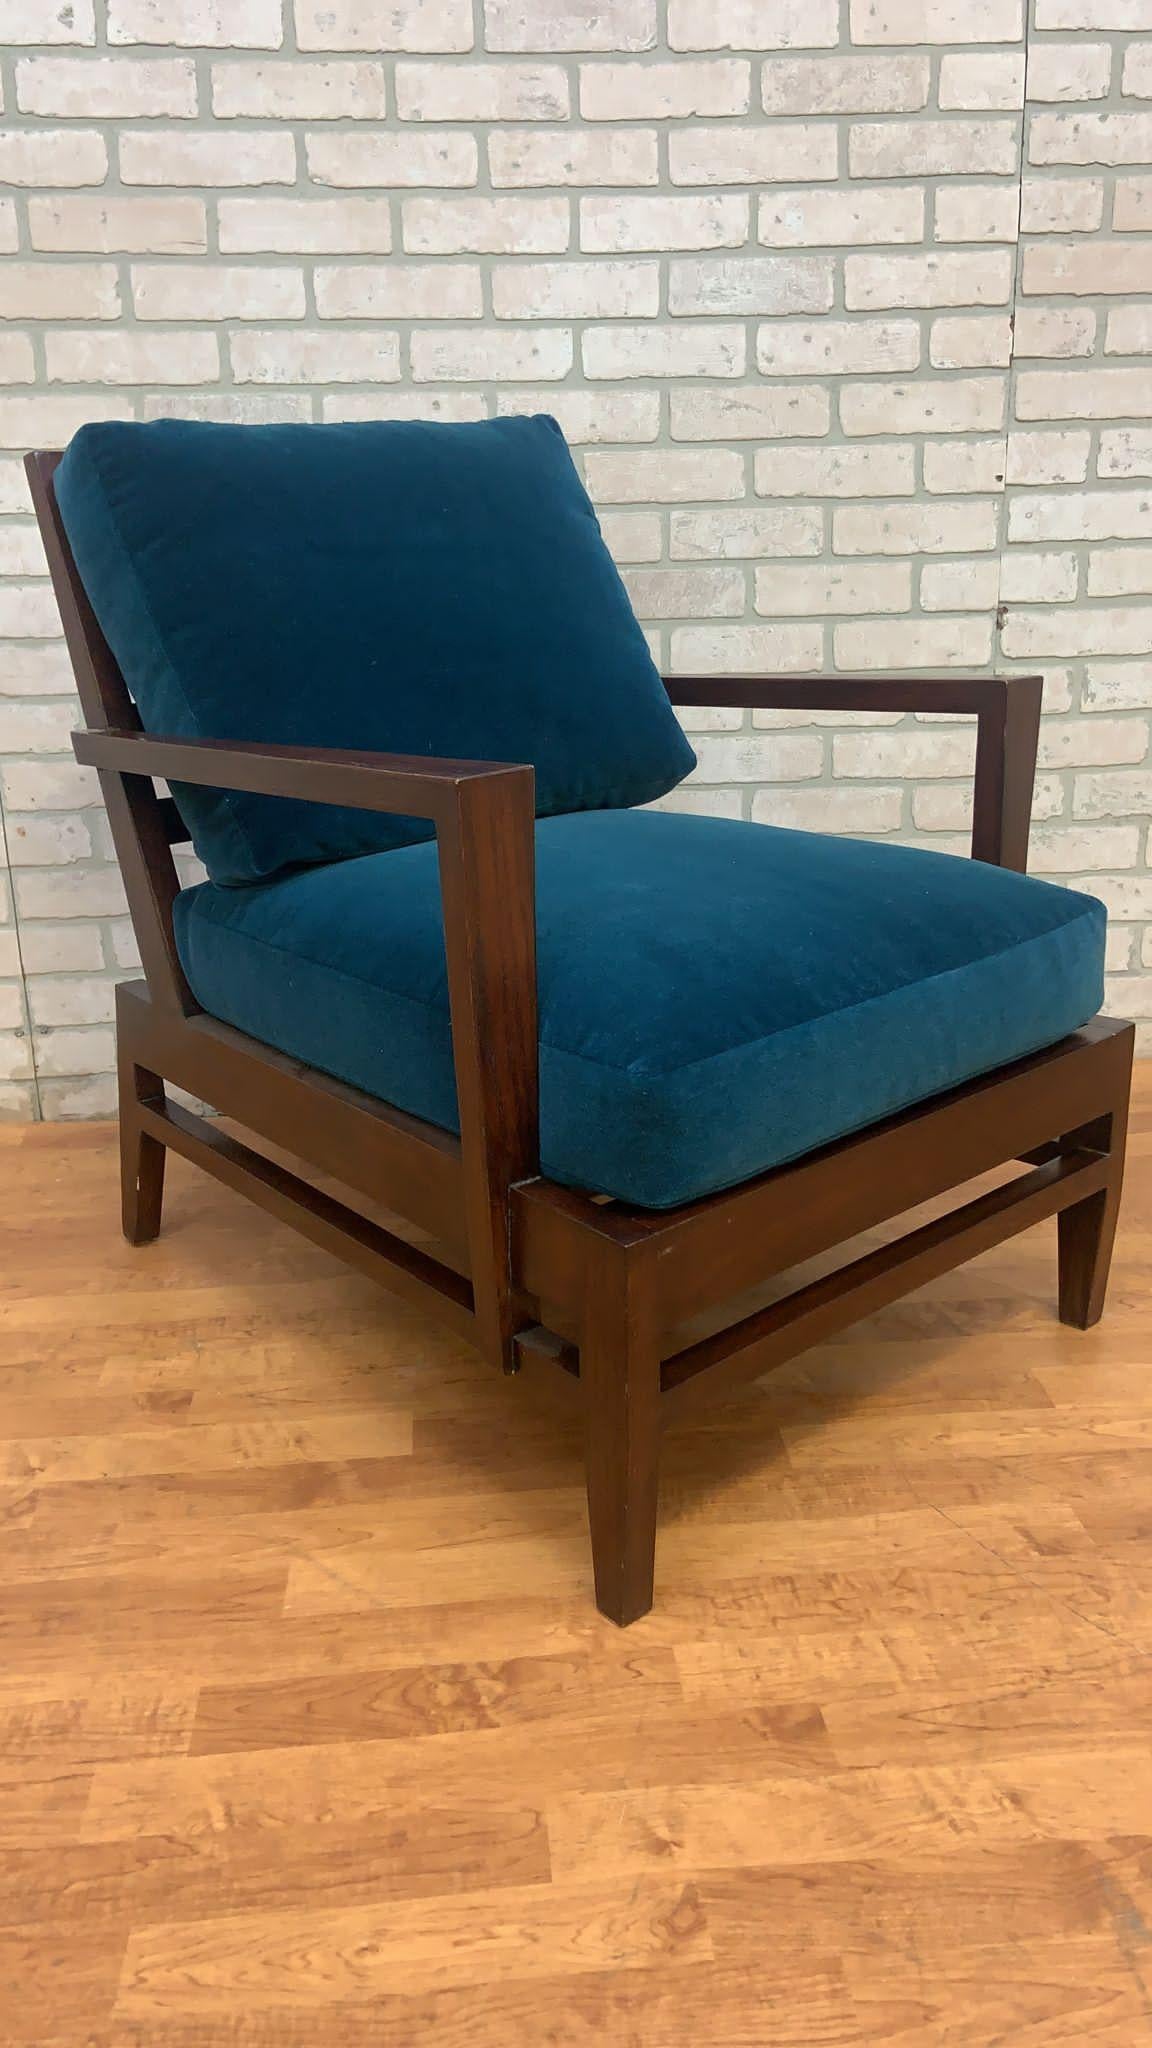 Hand-Crafted Vintage French René Gabriel Cherry Wood Slat Back Lounge Chair in Teal Mohair For Sale